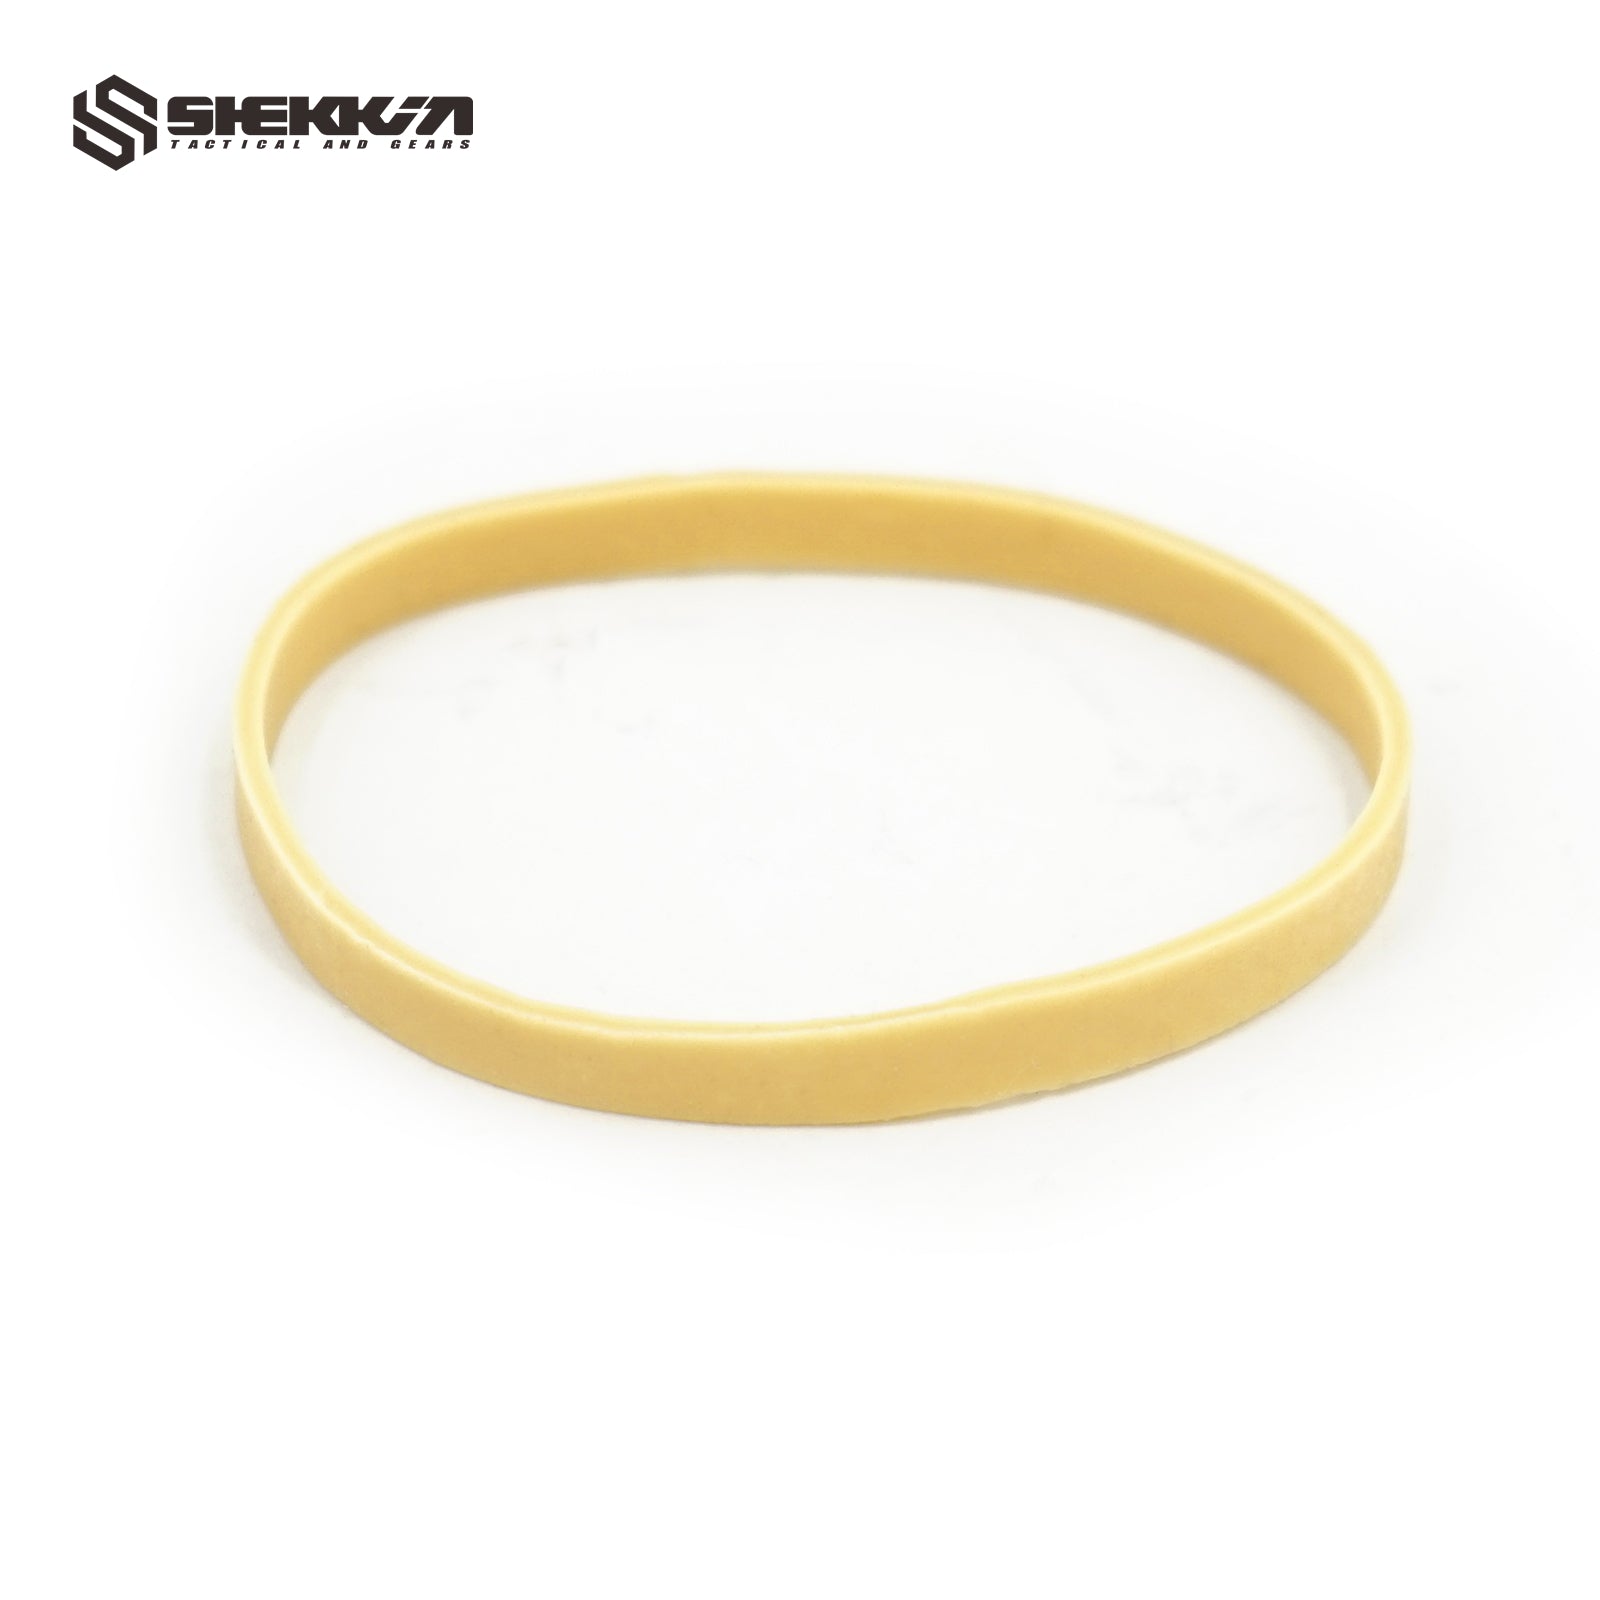 Shekkin Gears special force rubber Band